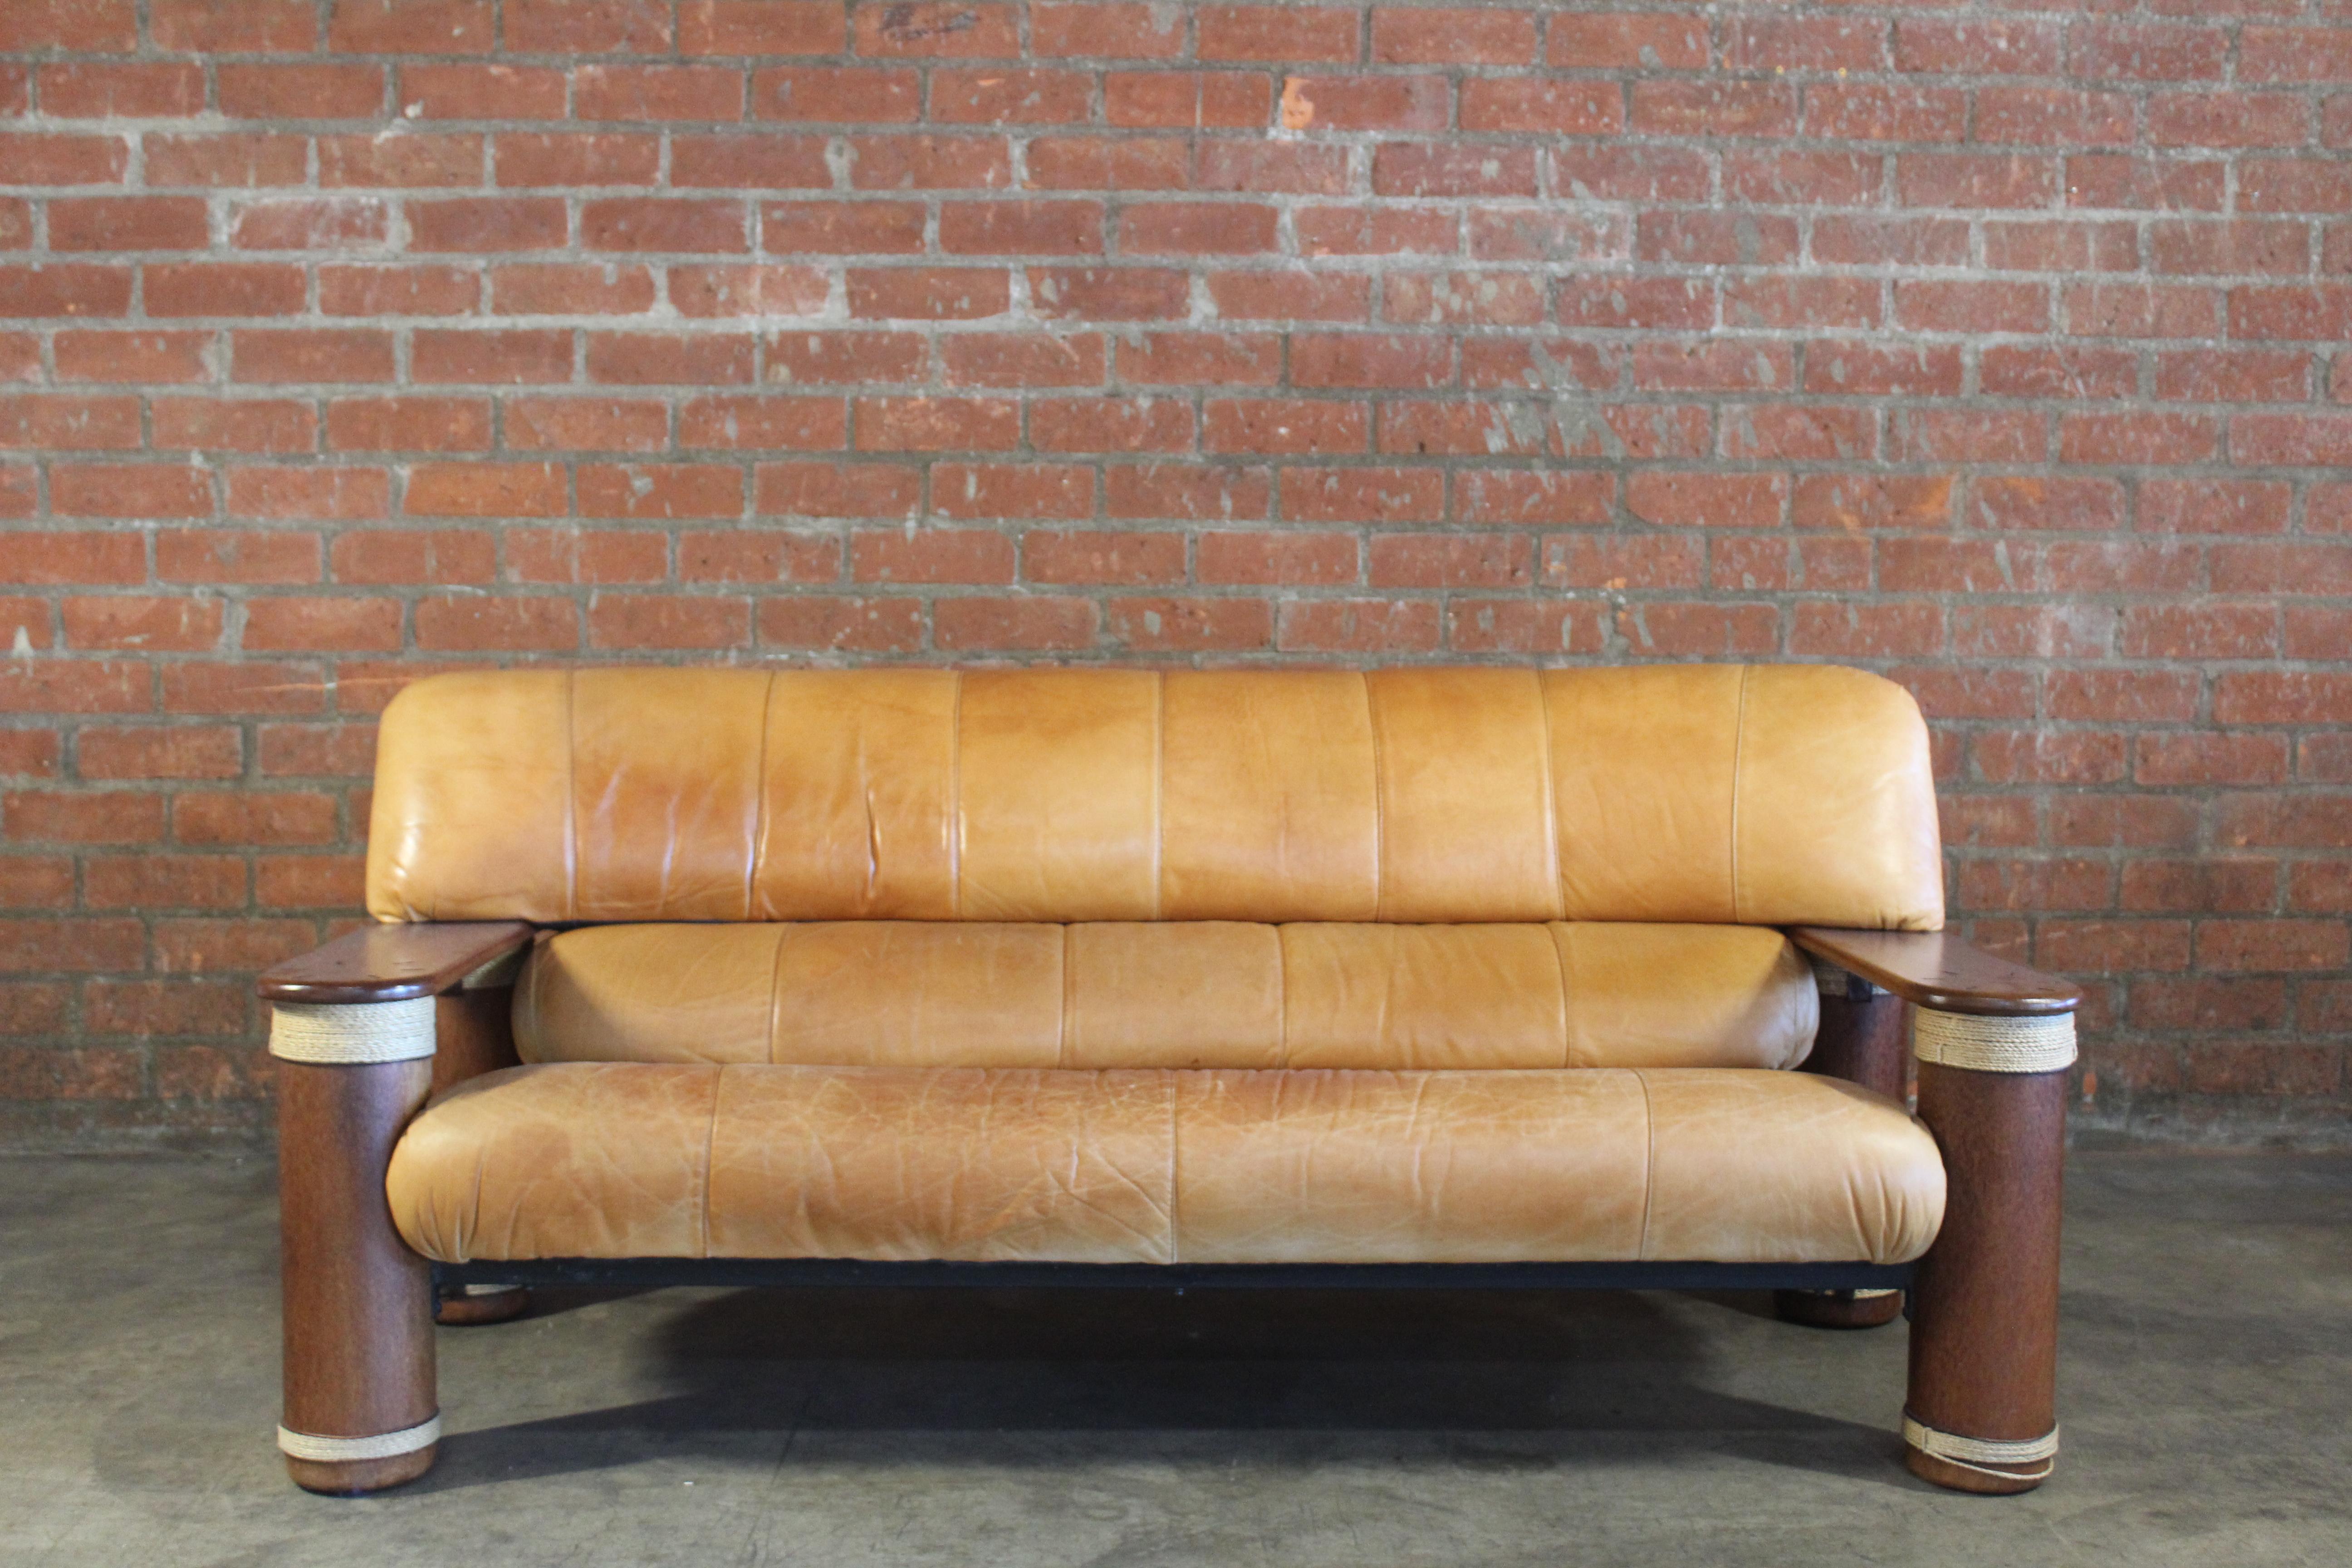 A leather and palmwood sofa with rope detailing made by Pacific Green in the 1990s. In overall good condition with wear and patina to the leather. Matching settee also available.